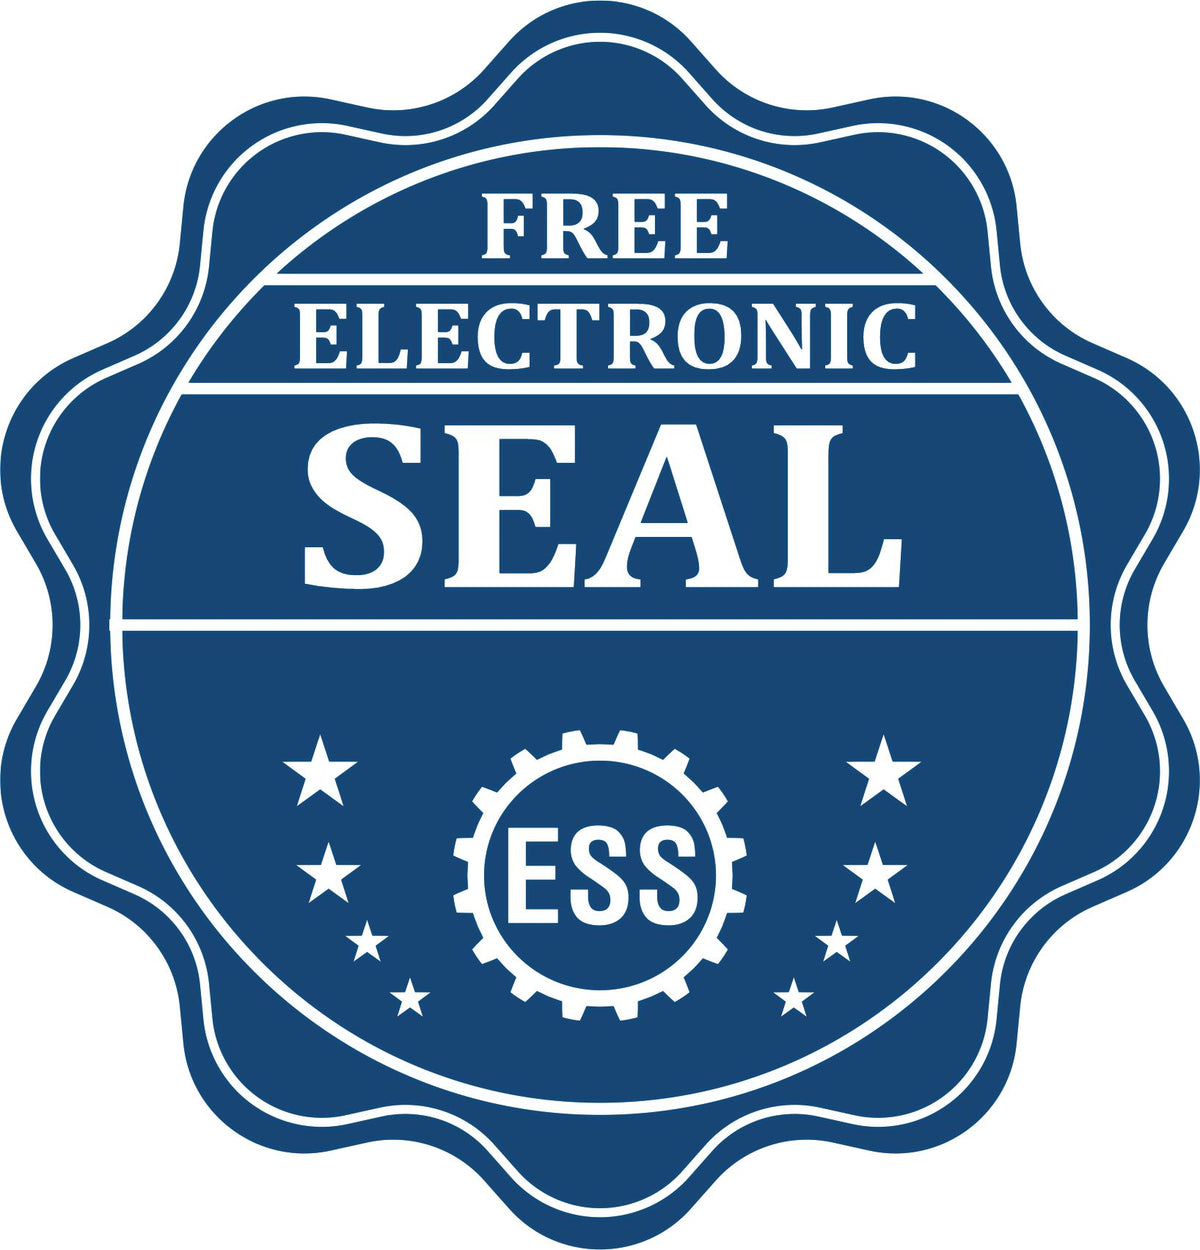 A badge showing a free electronic seal for the Gift Delaware Architect Seal with stars and the ESS gear on the emblem.